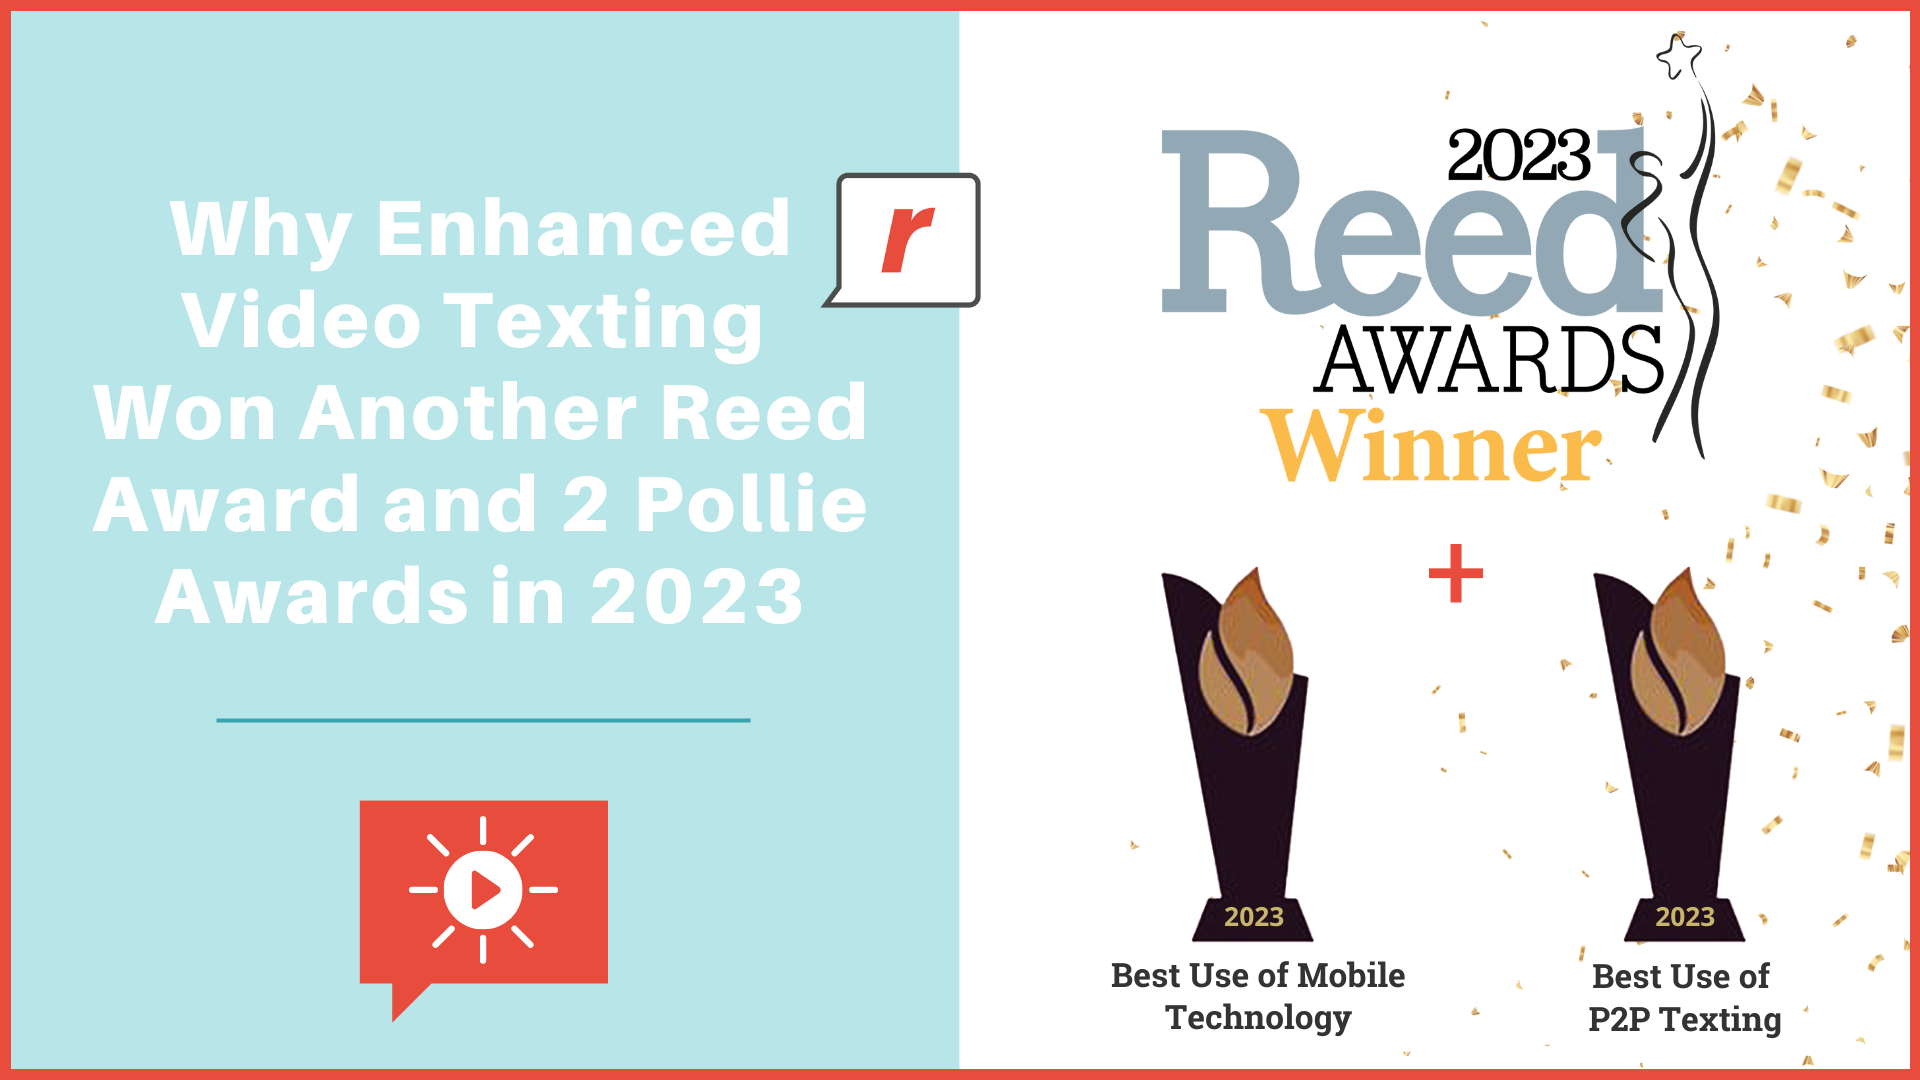 Why Enhanced Video Texting Won Another Reed Award and 2 Pollie Awards in 2023